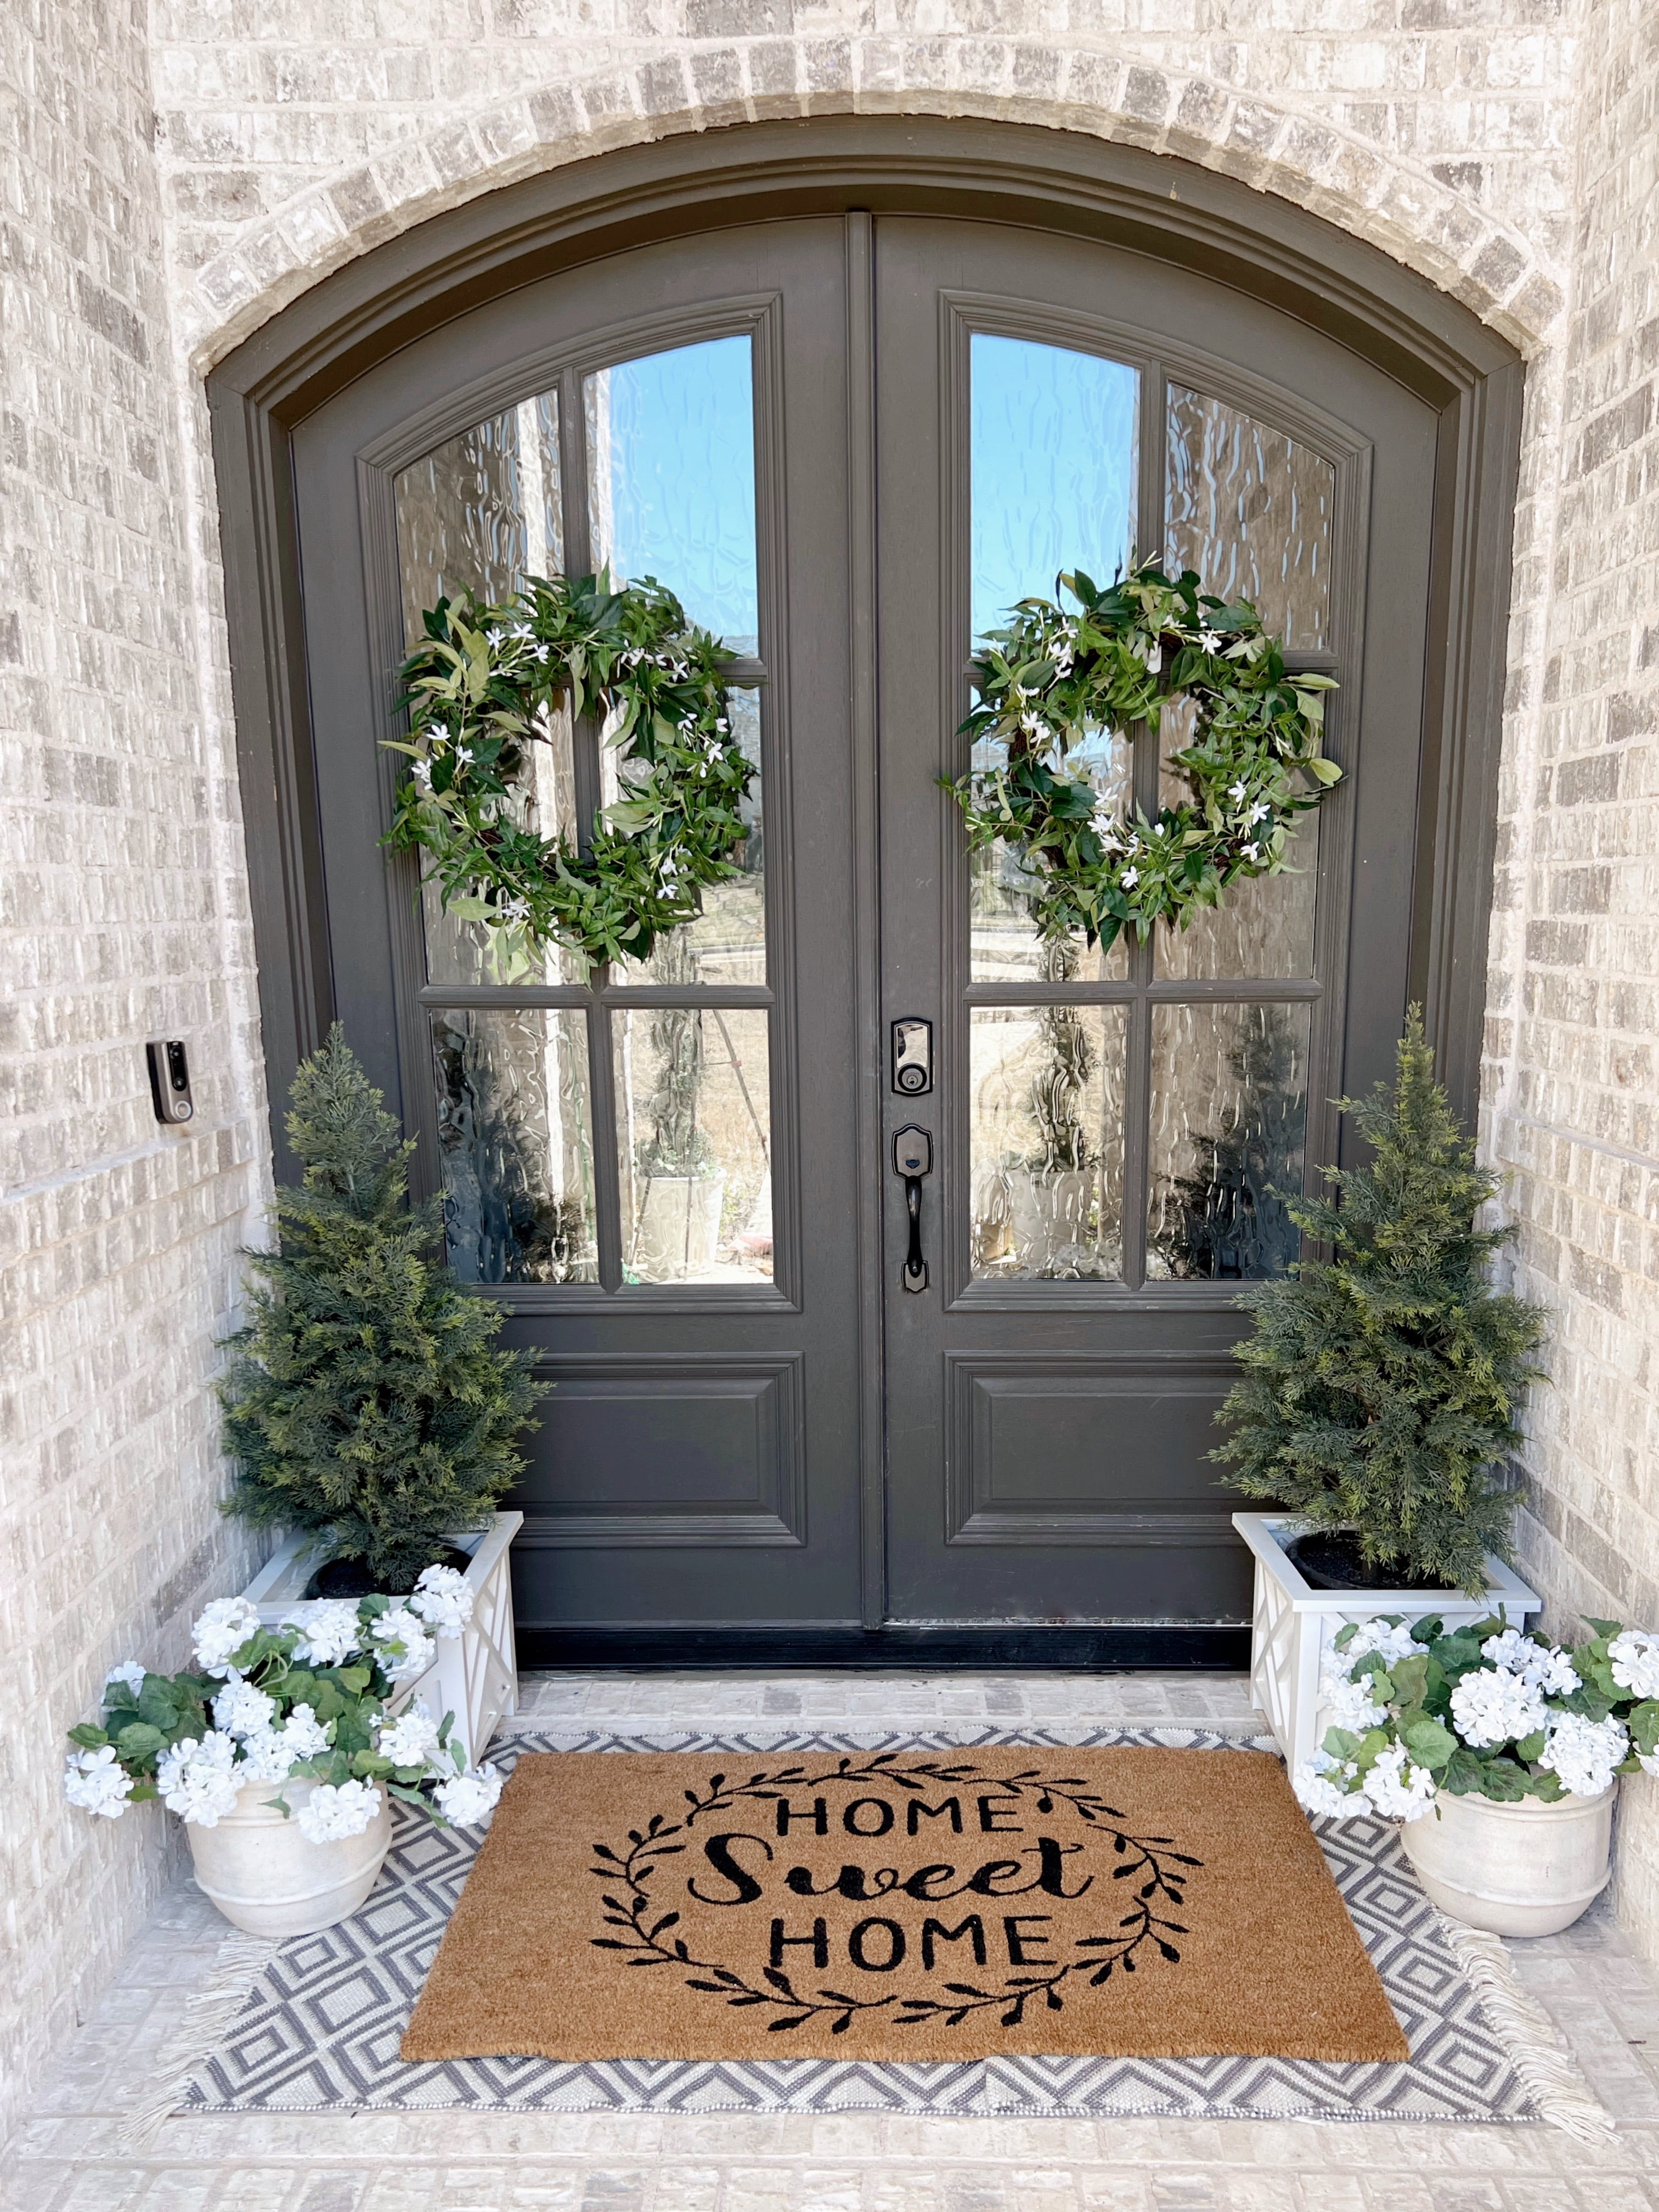 Home Sweet Home Doormat – Welcome Home by DII